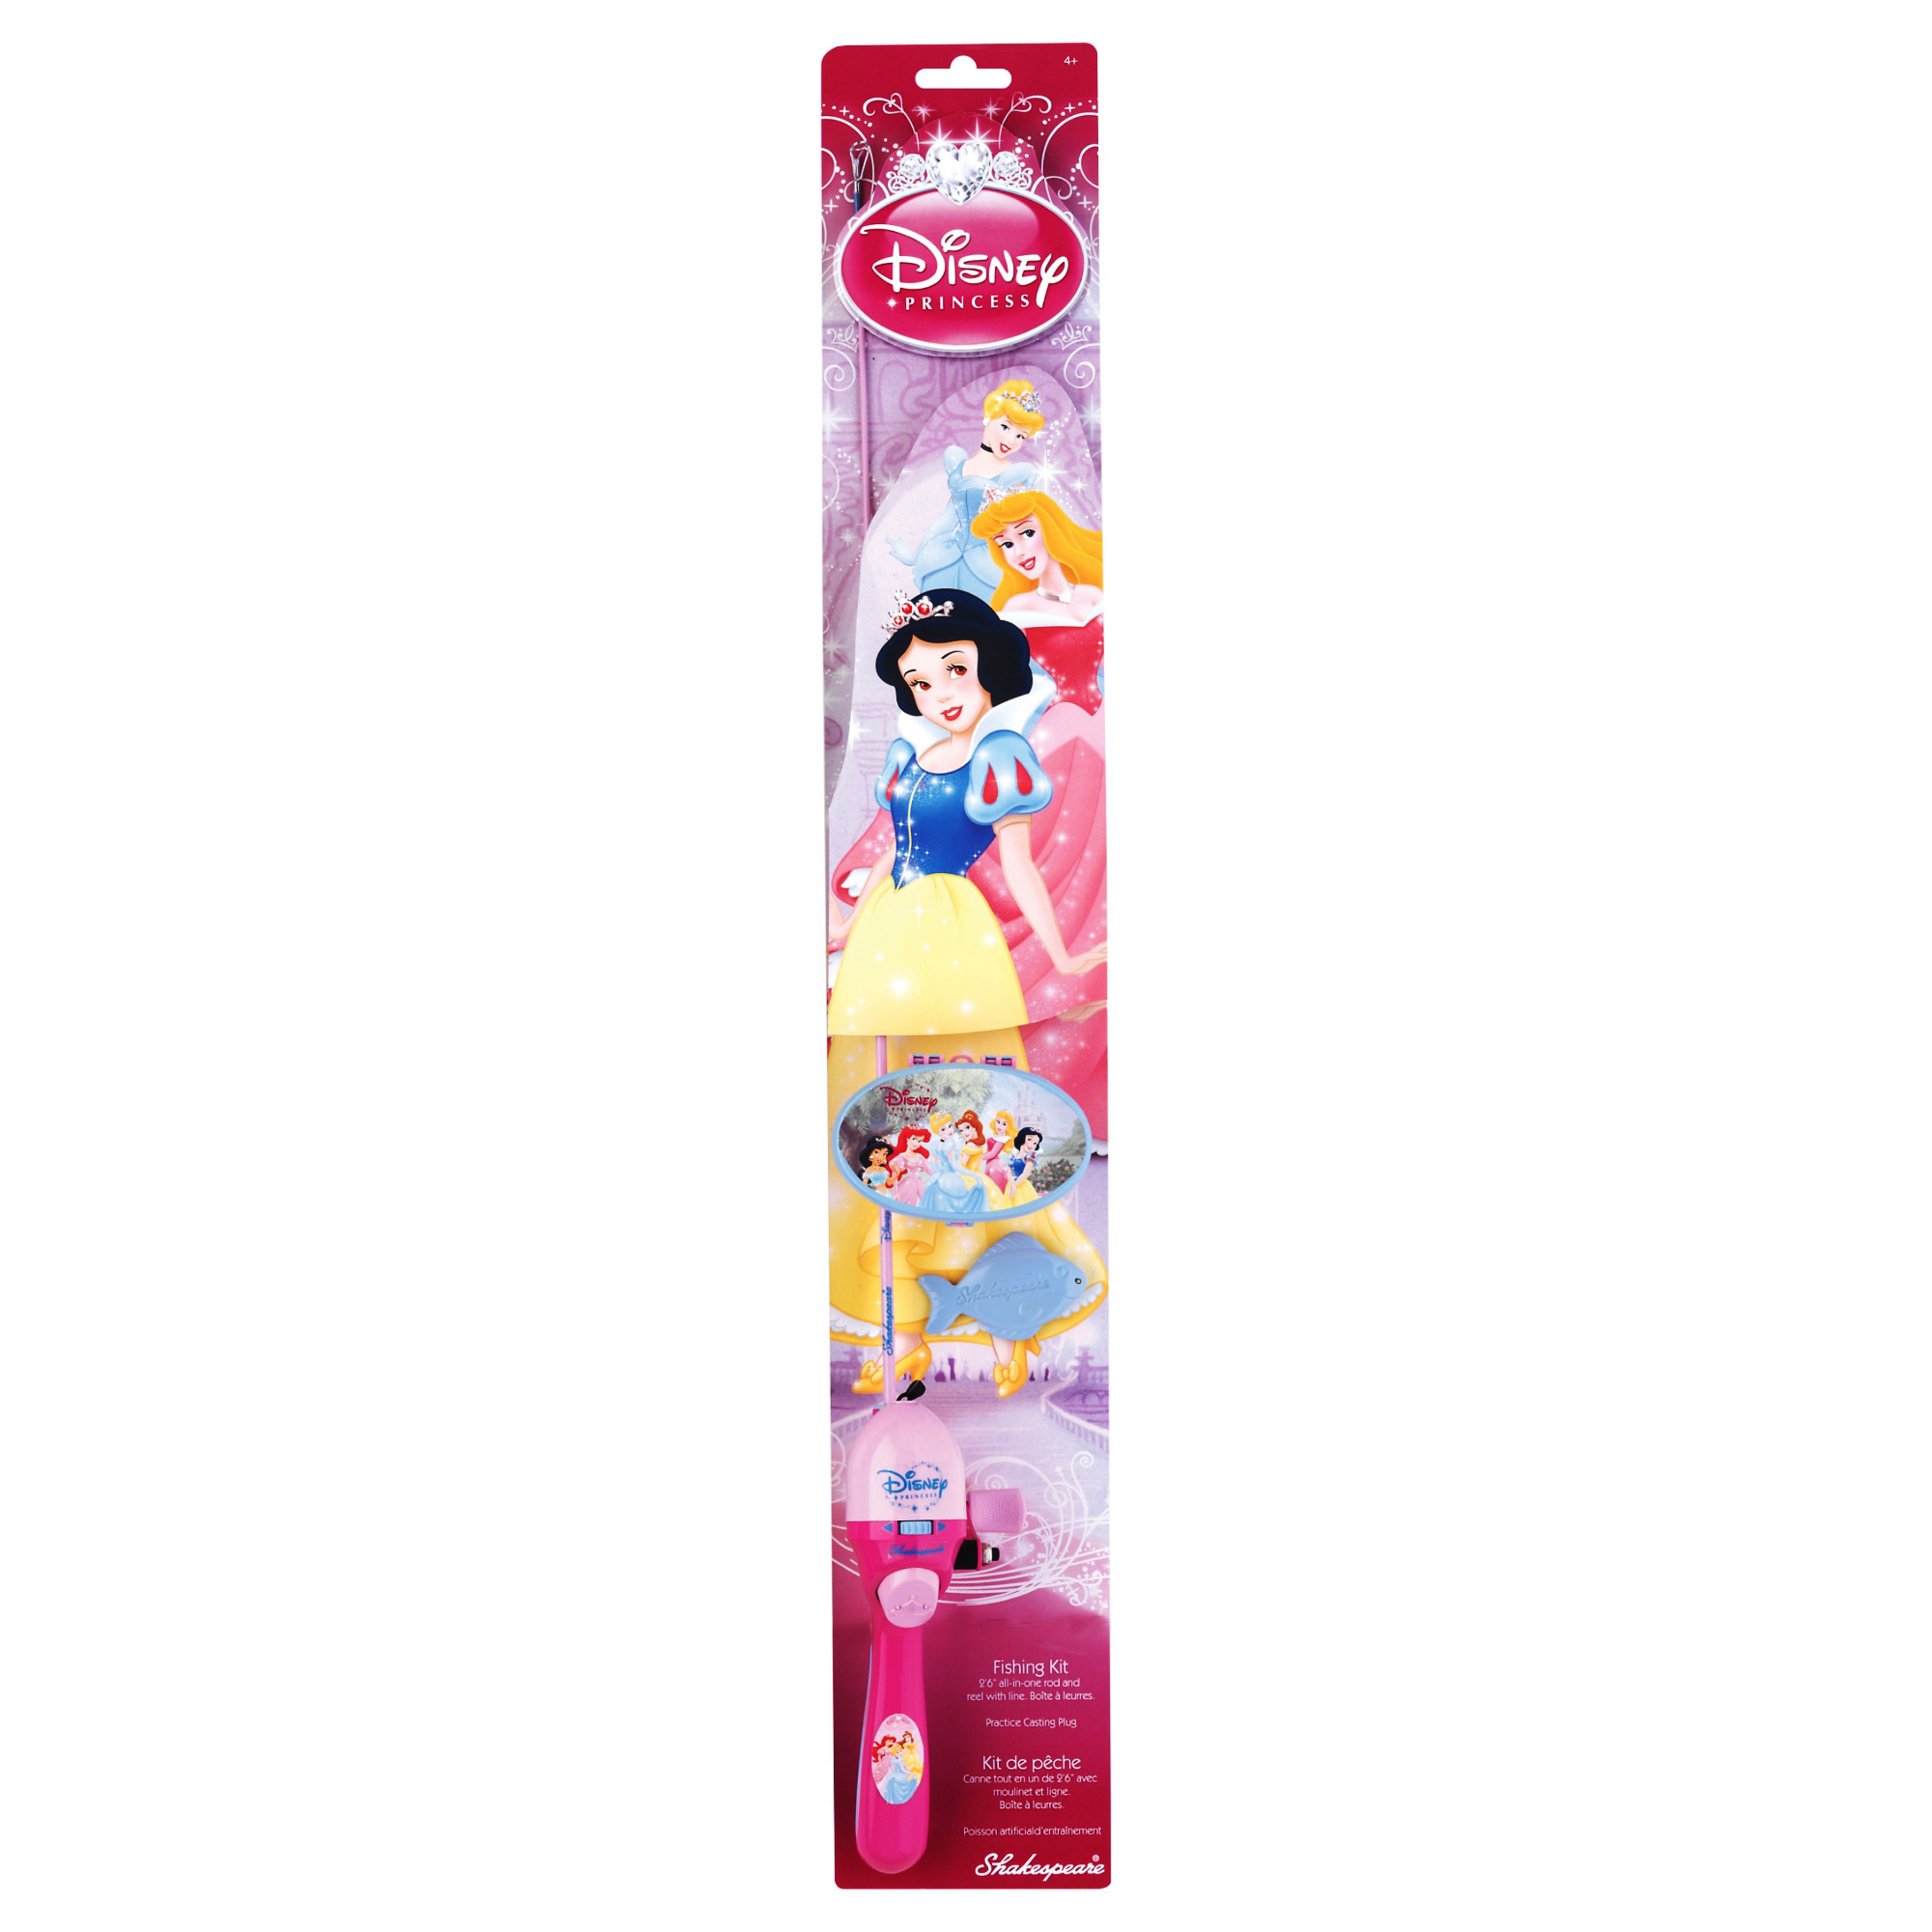 Shakespeare Disney Princess All-In-One 2'6" Rod And Reel Casting Kit with Tackle Box - image 1 of 2